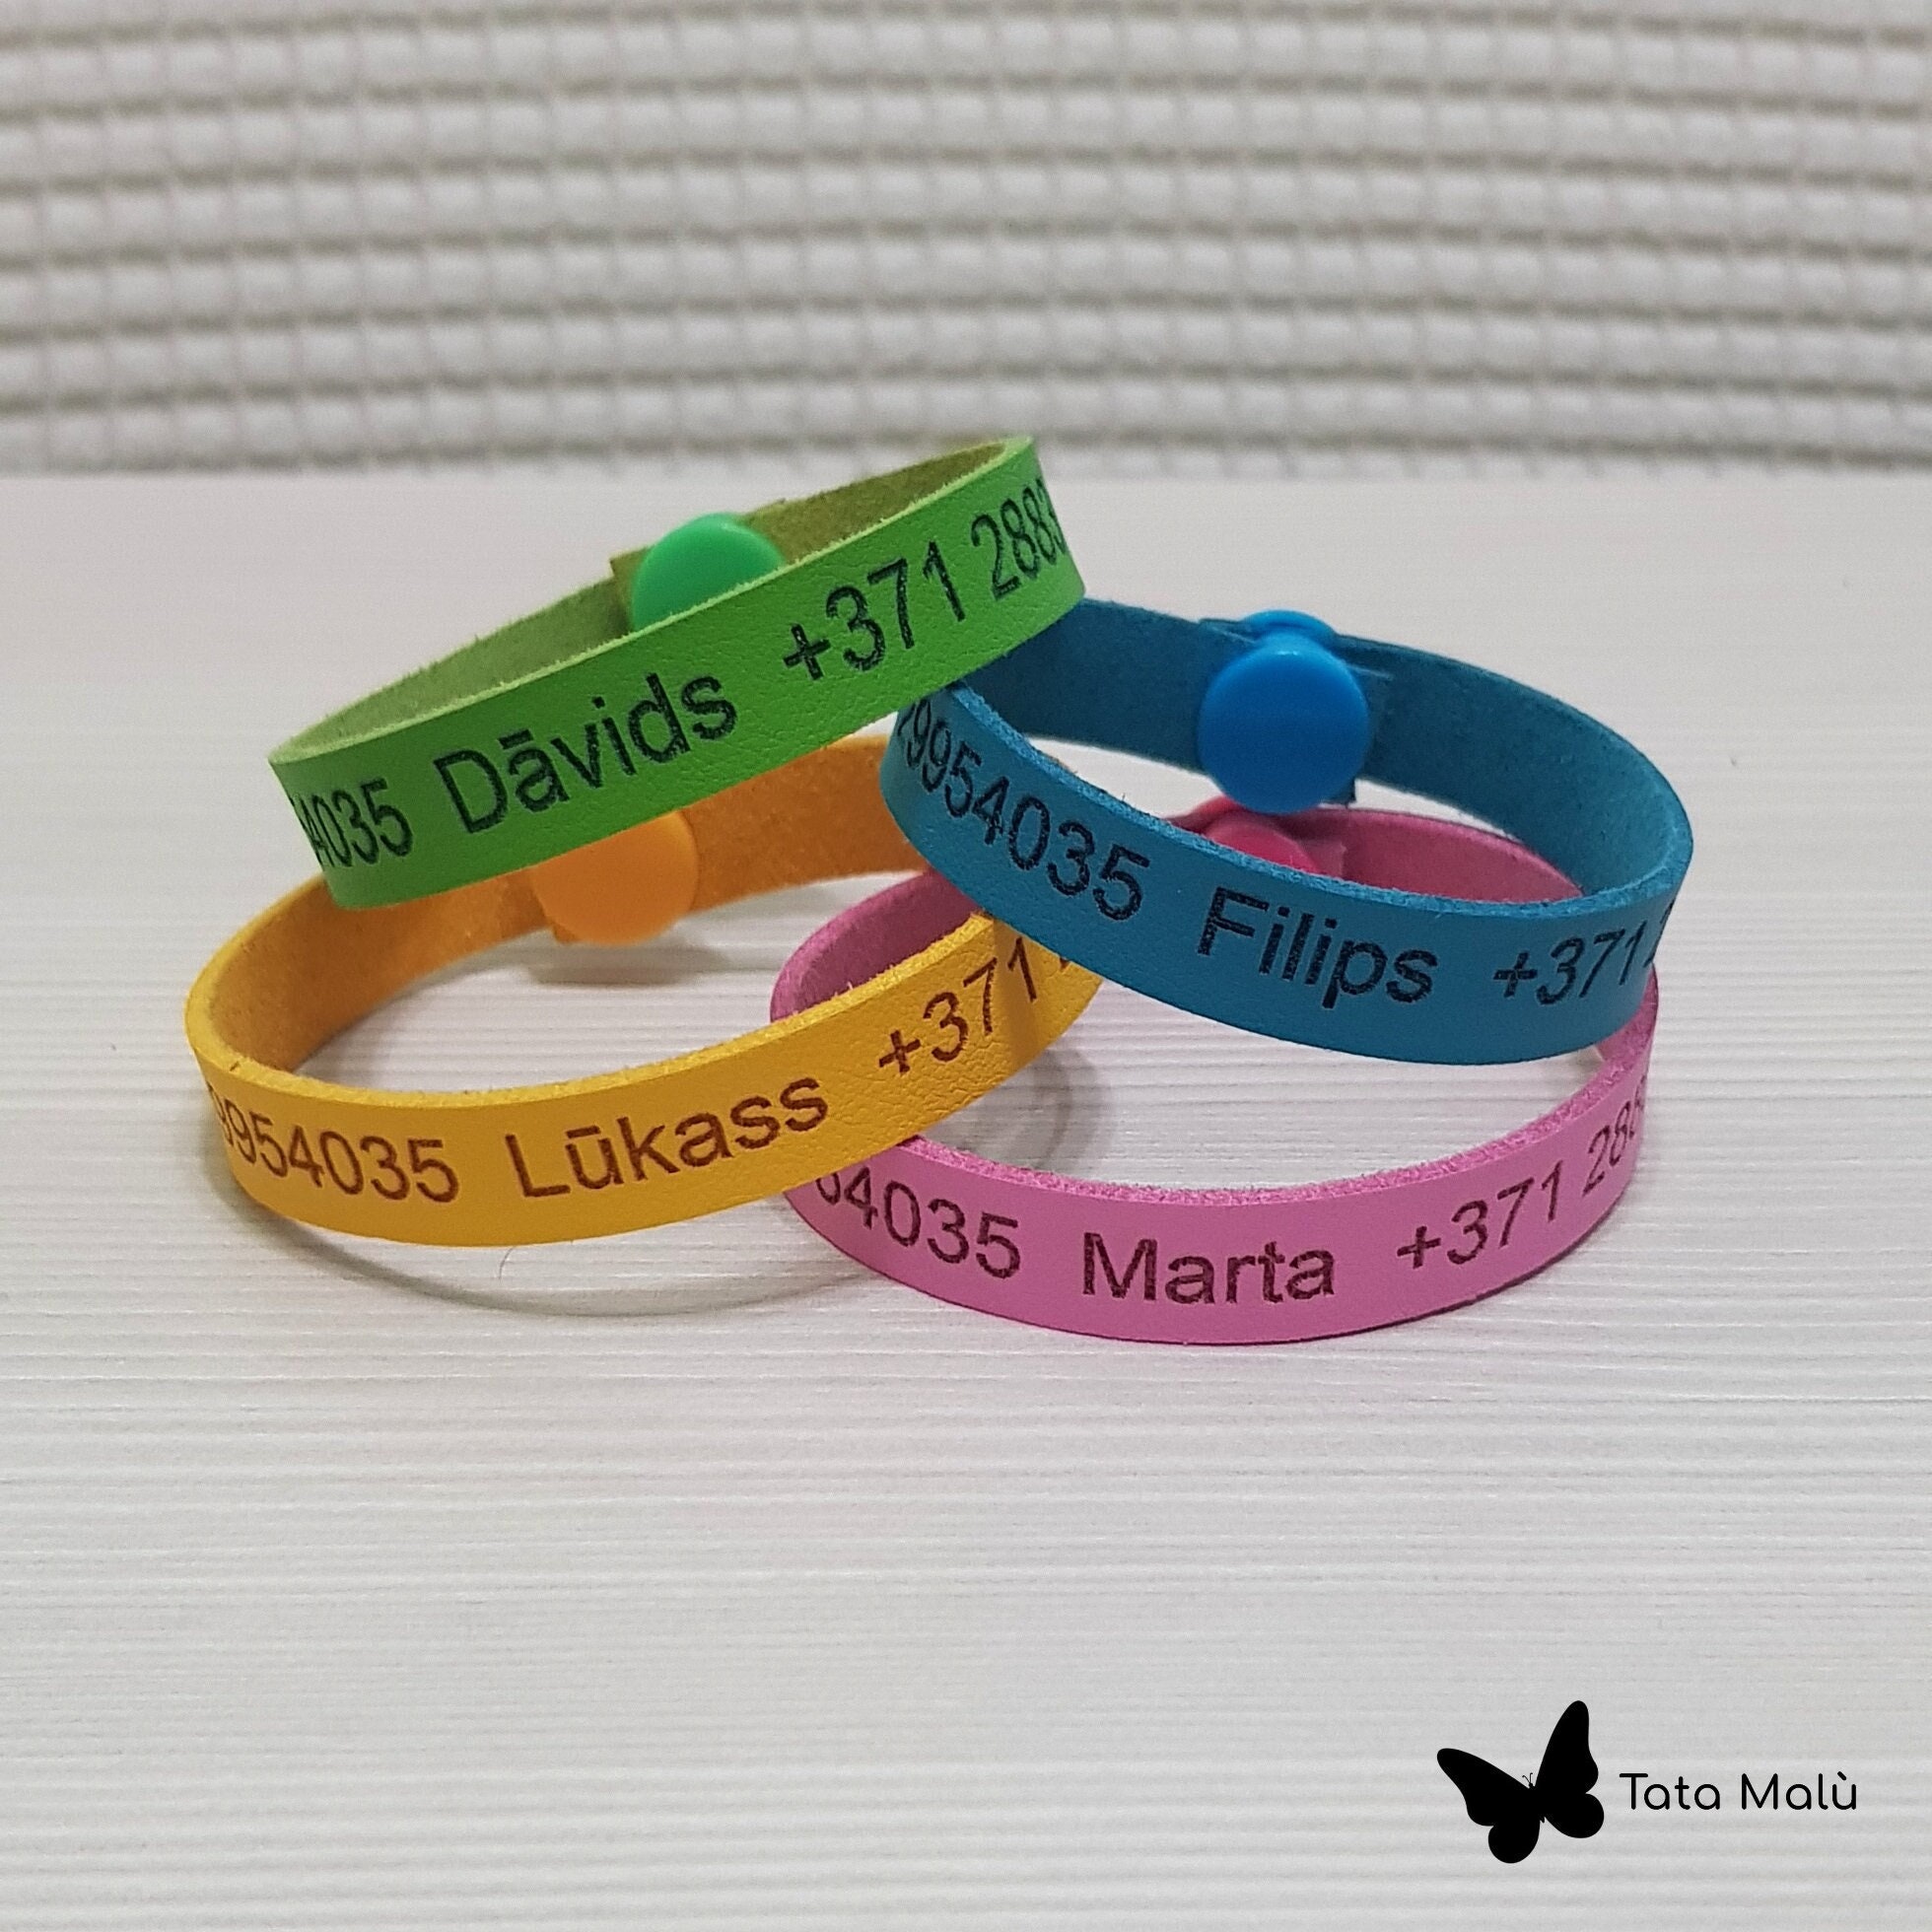 Childrens bracelets with phone numbers on demand  Bacumba